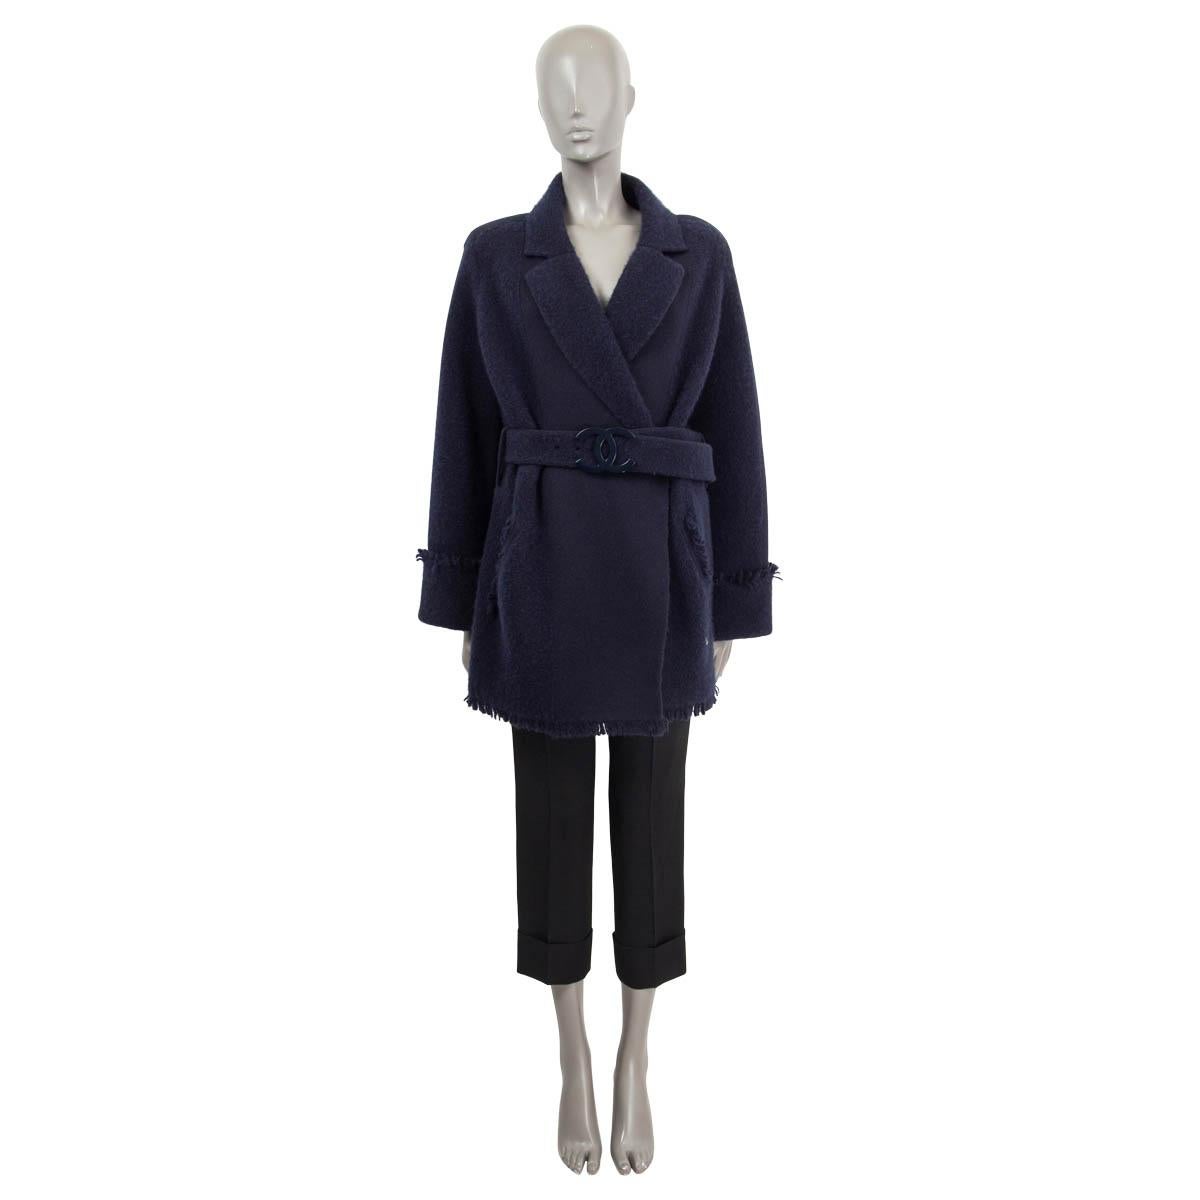 100% authentic Chanel belted oversized knit coat in navy cashmere (88%), polypropylene (6%) and silk (6%). Features long raglan sleeves (sleeve measurements taken from the neck), two slit pockets and fringed details. Has a matching detachable 'CC'